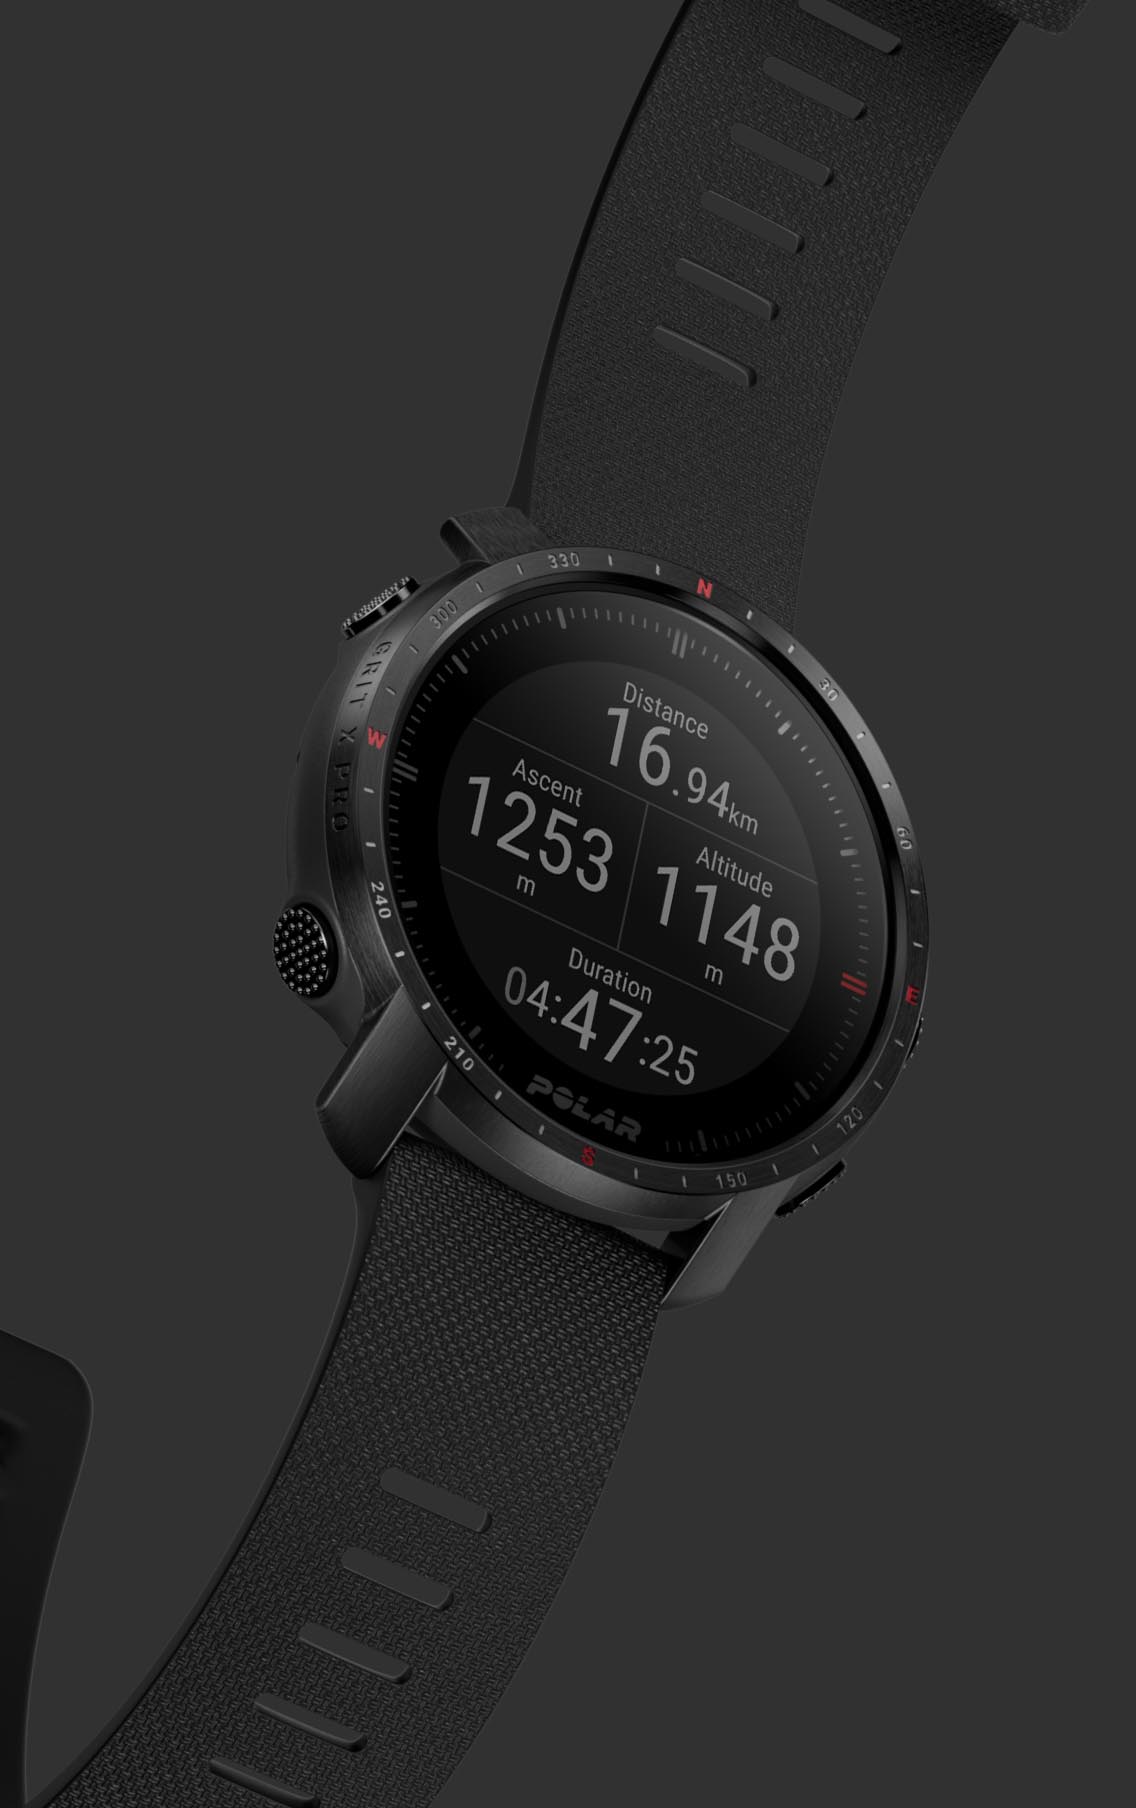 Polar Grit X, Outdoor watch with GPS, compass and altimeter